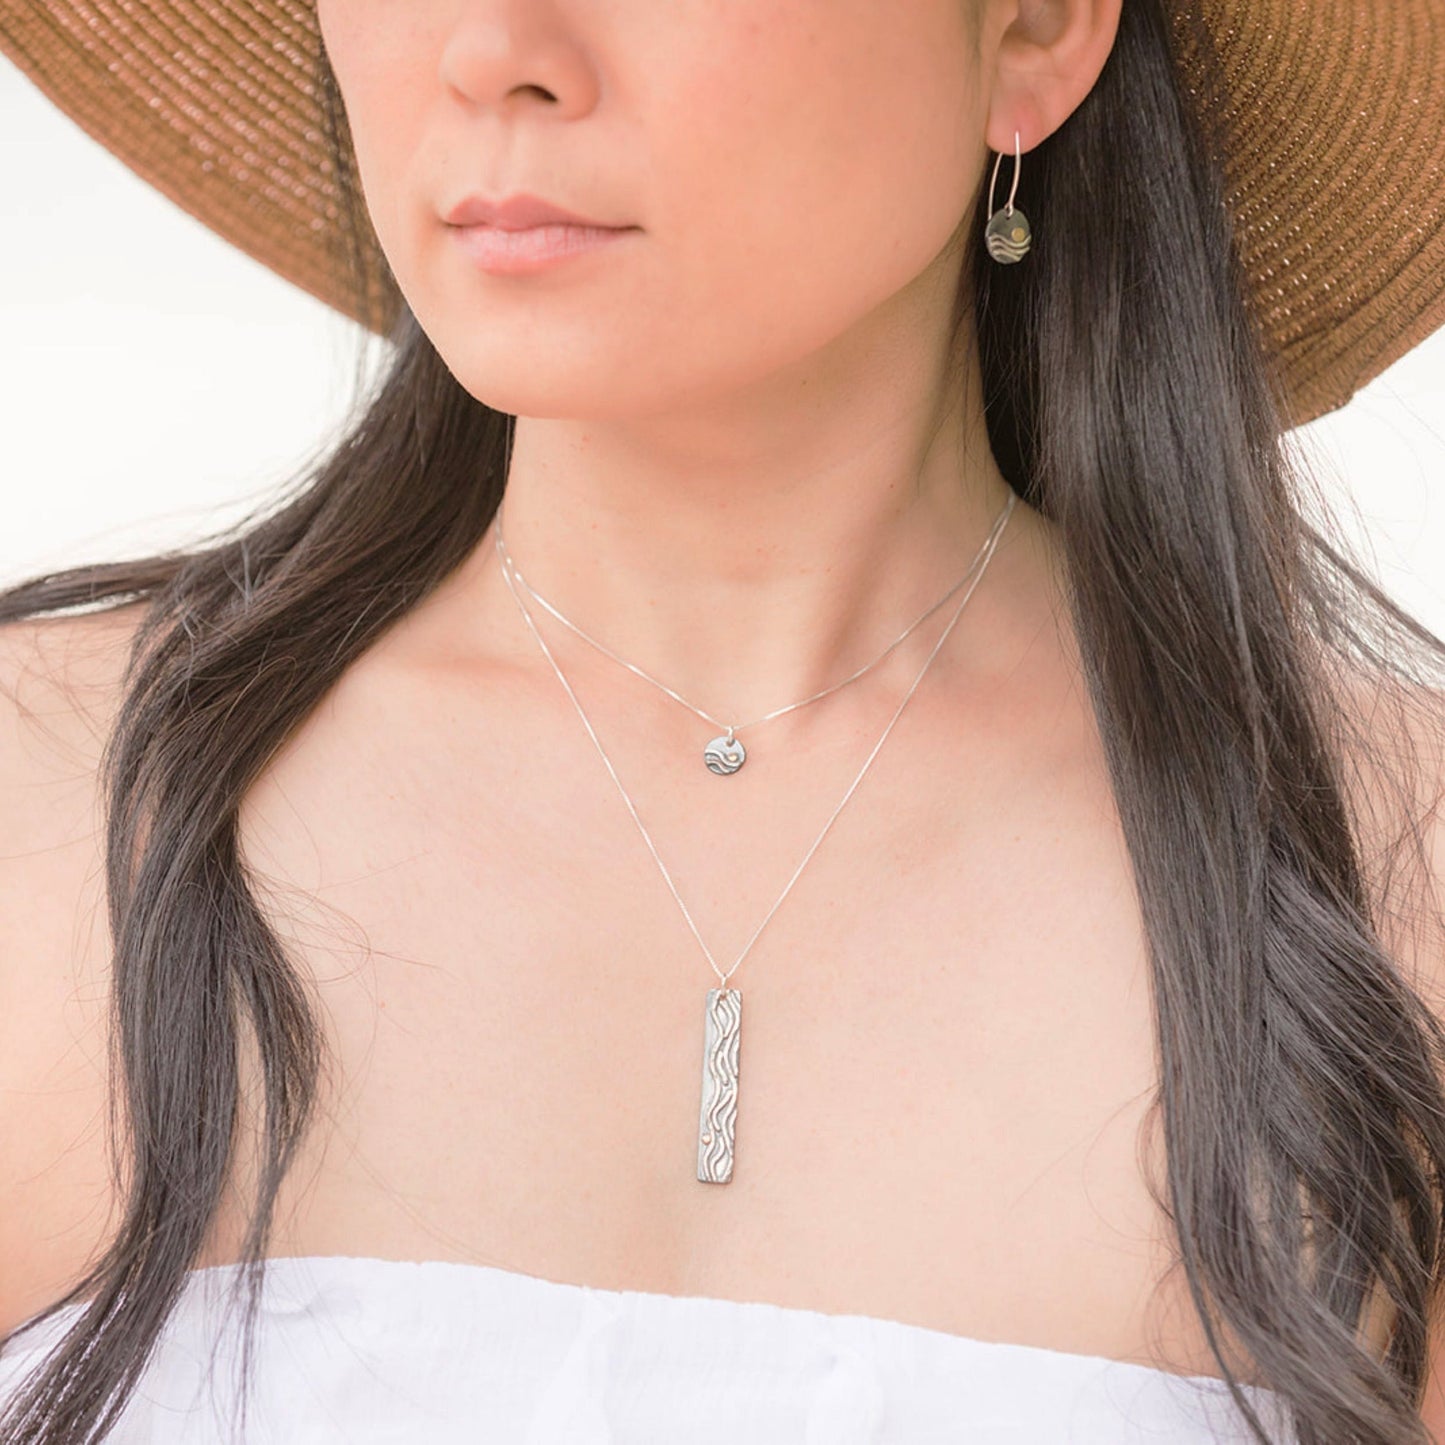 Reflections charm necklace on model